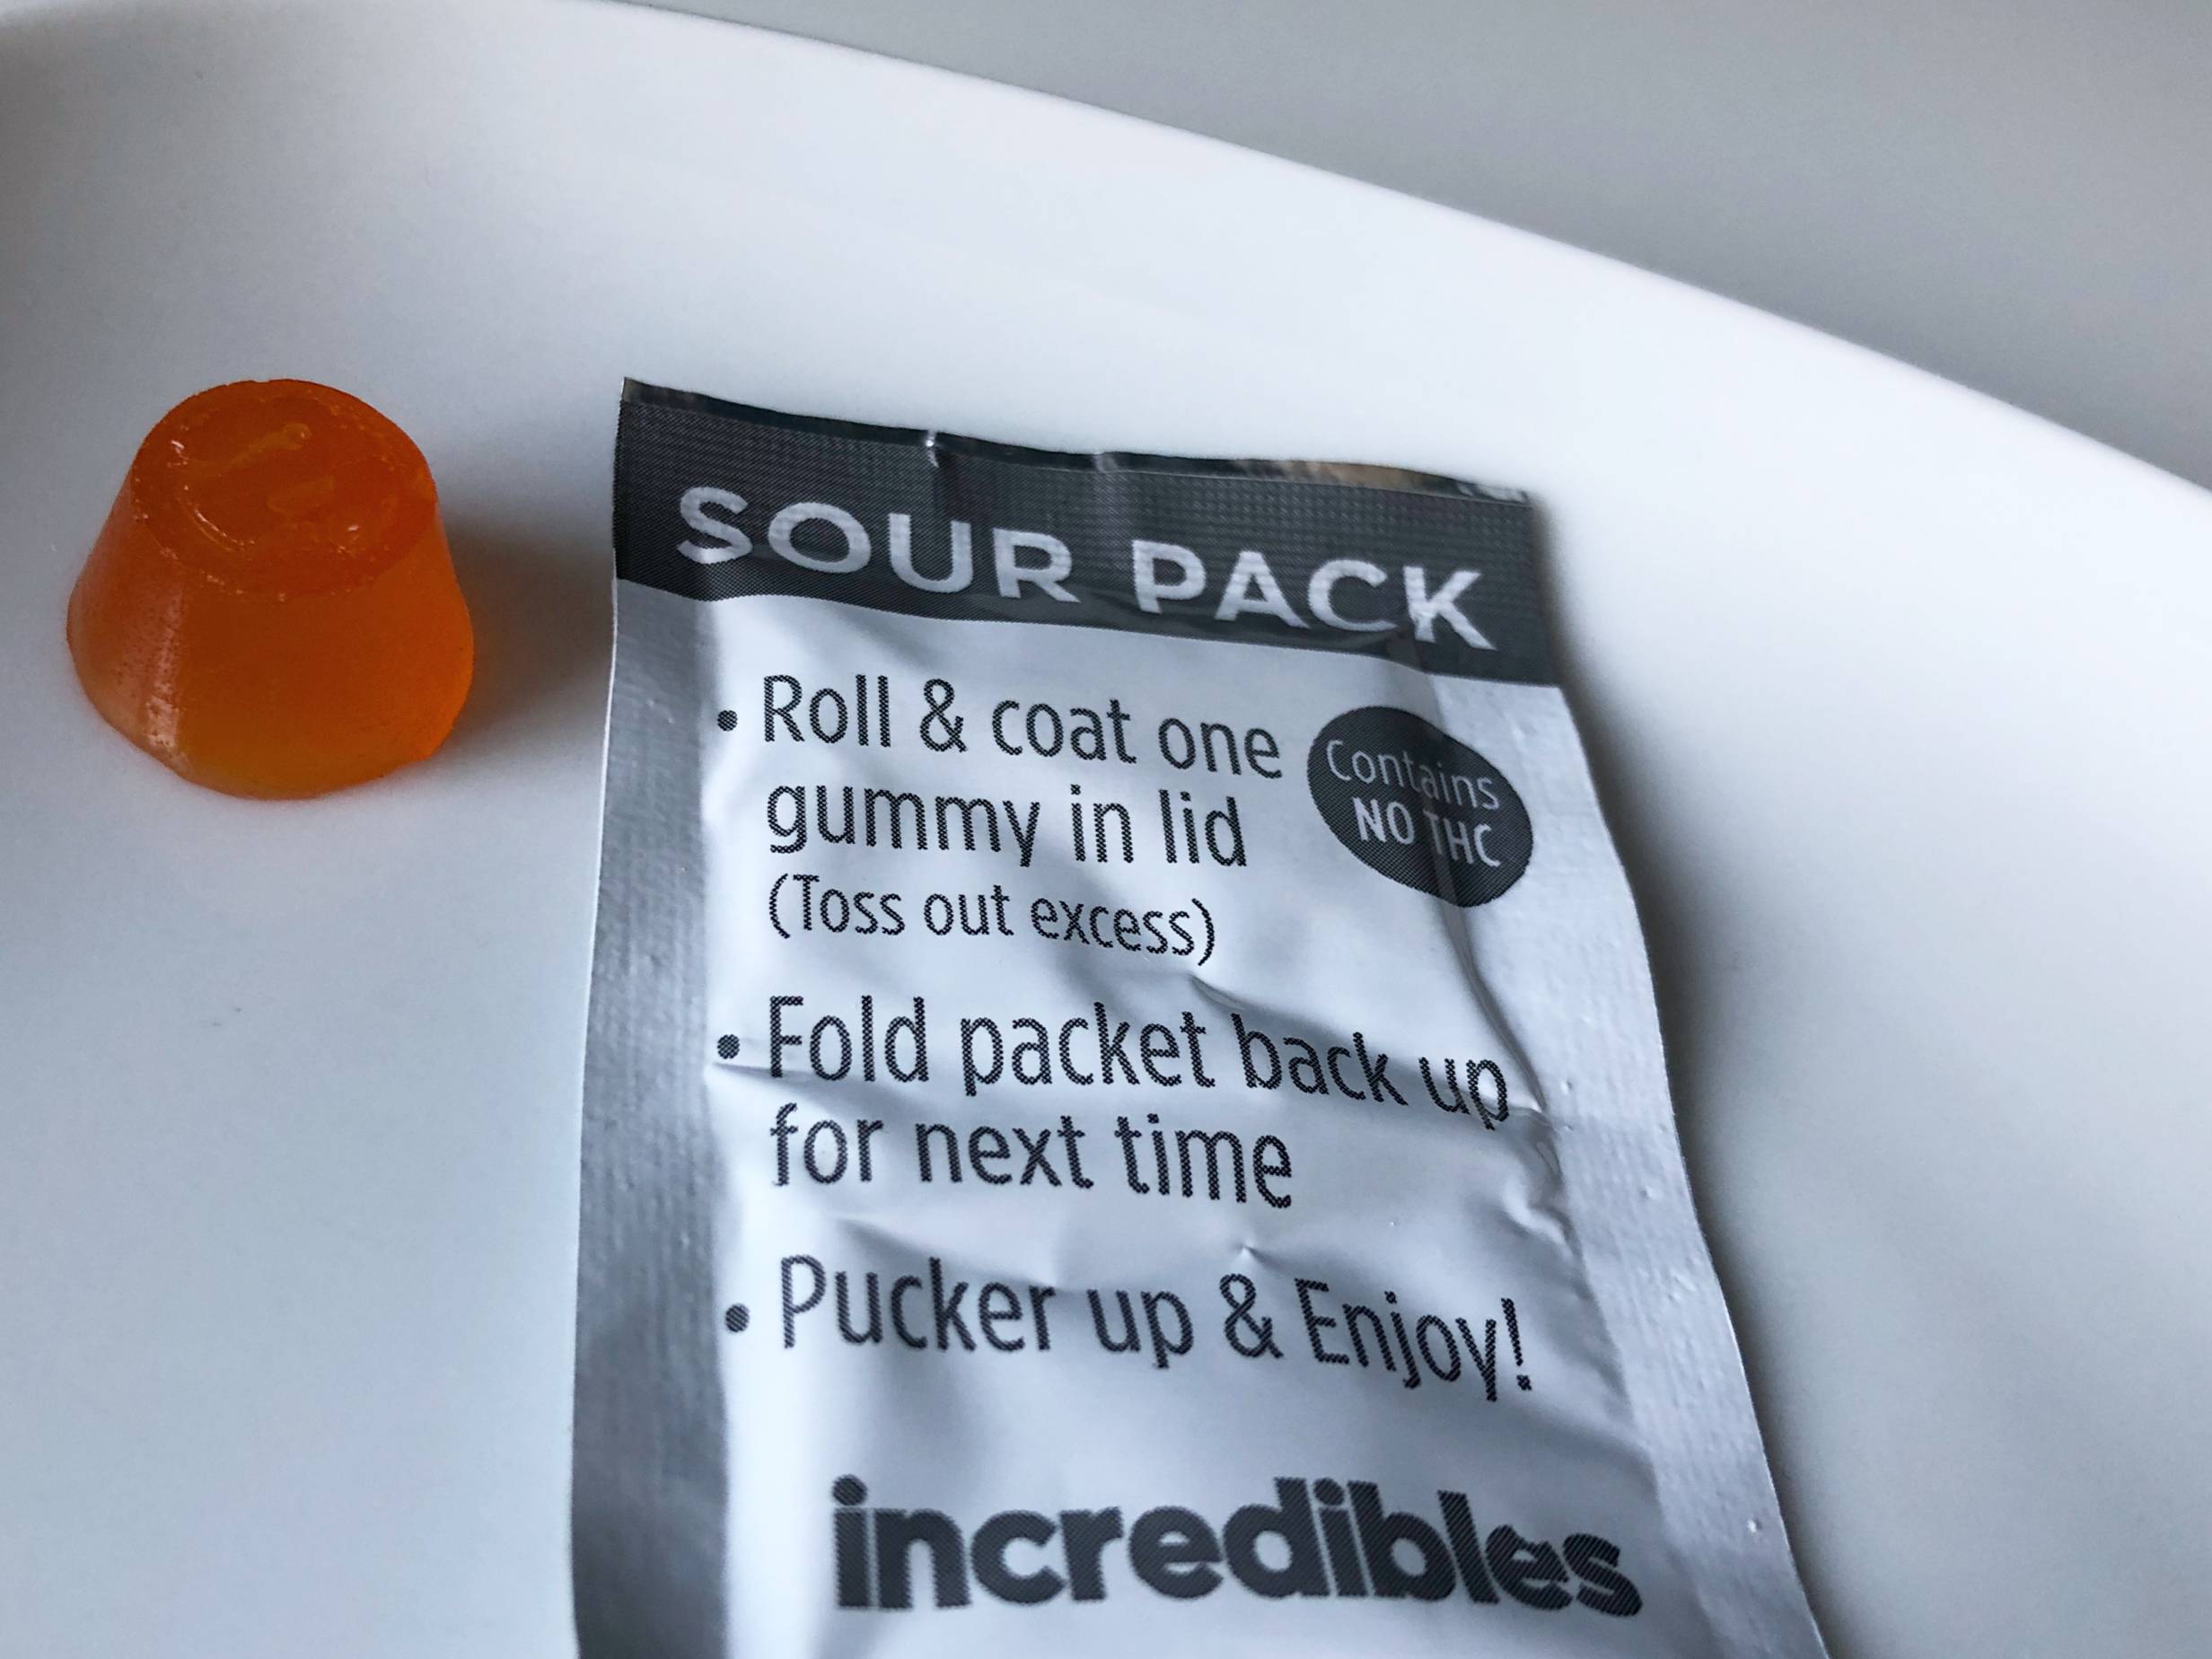 An orange cannabis-infused gummy sits on a white table next to a metal packet of sour-sugar with instructions for rolling the gummy in the packet. Photo by Alyssa Buckley.